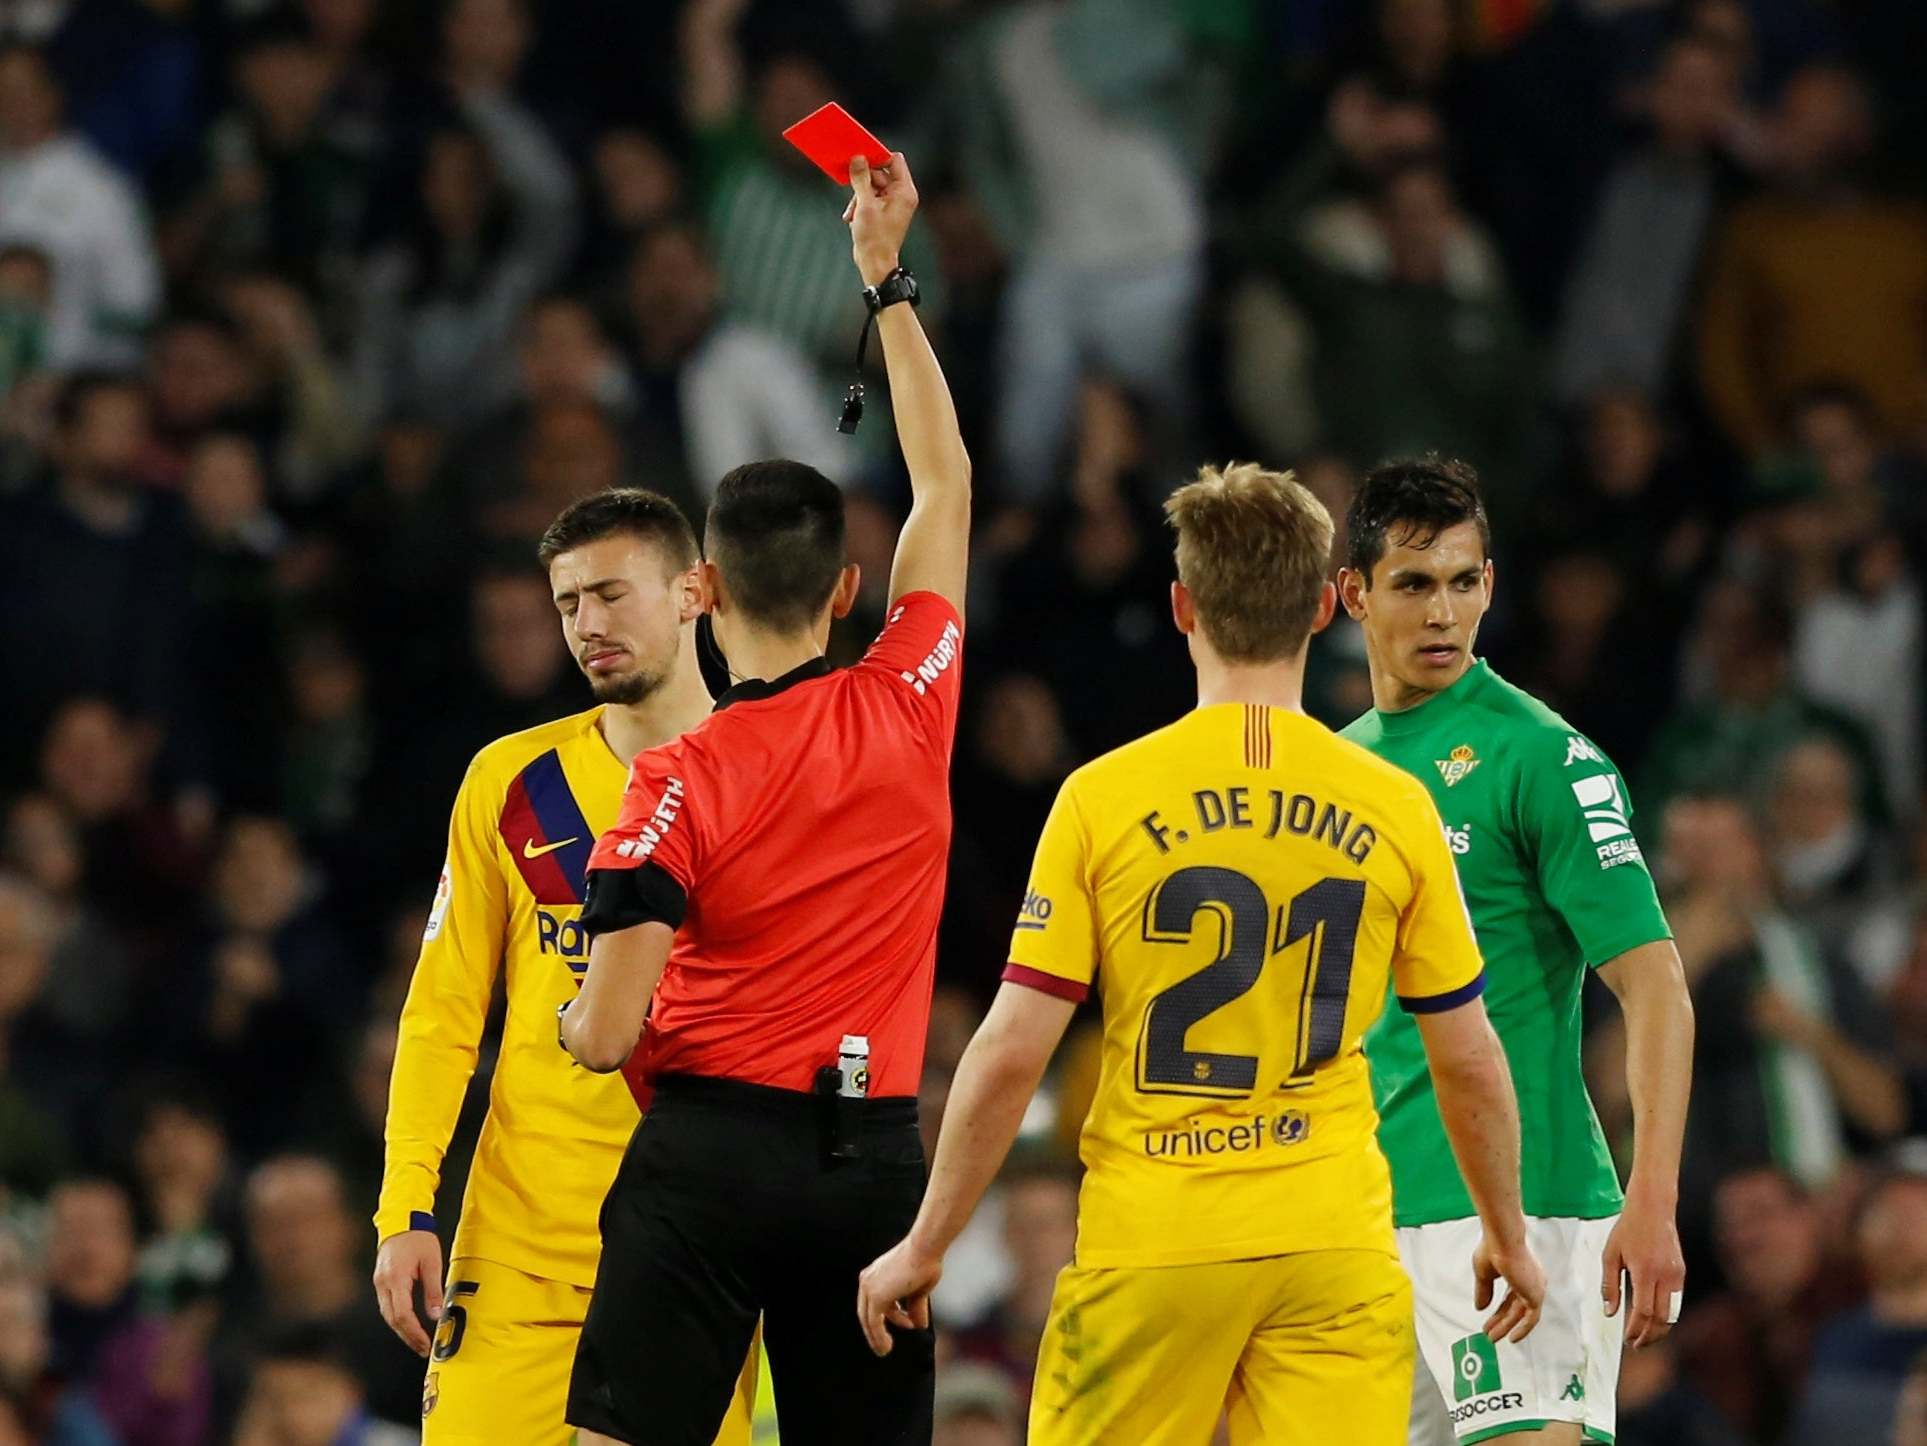 Barcelona's Clement Lenglet is shown a red card by referee Sanchez Martinez